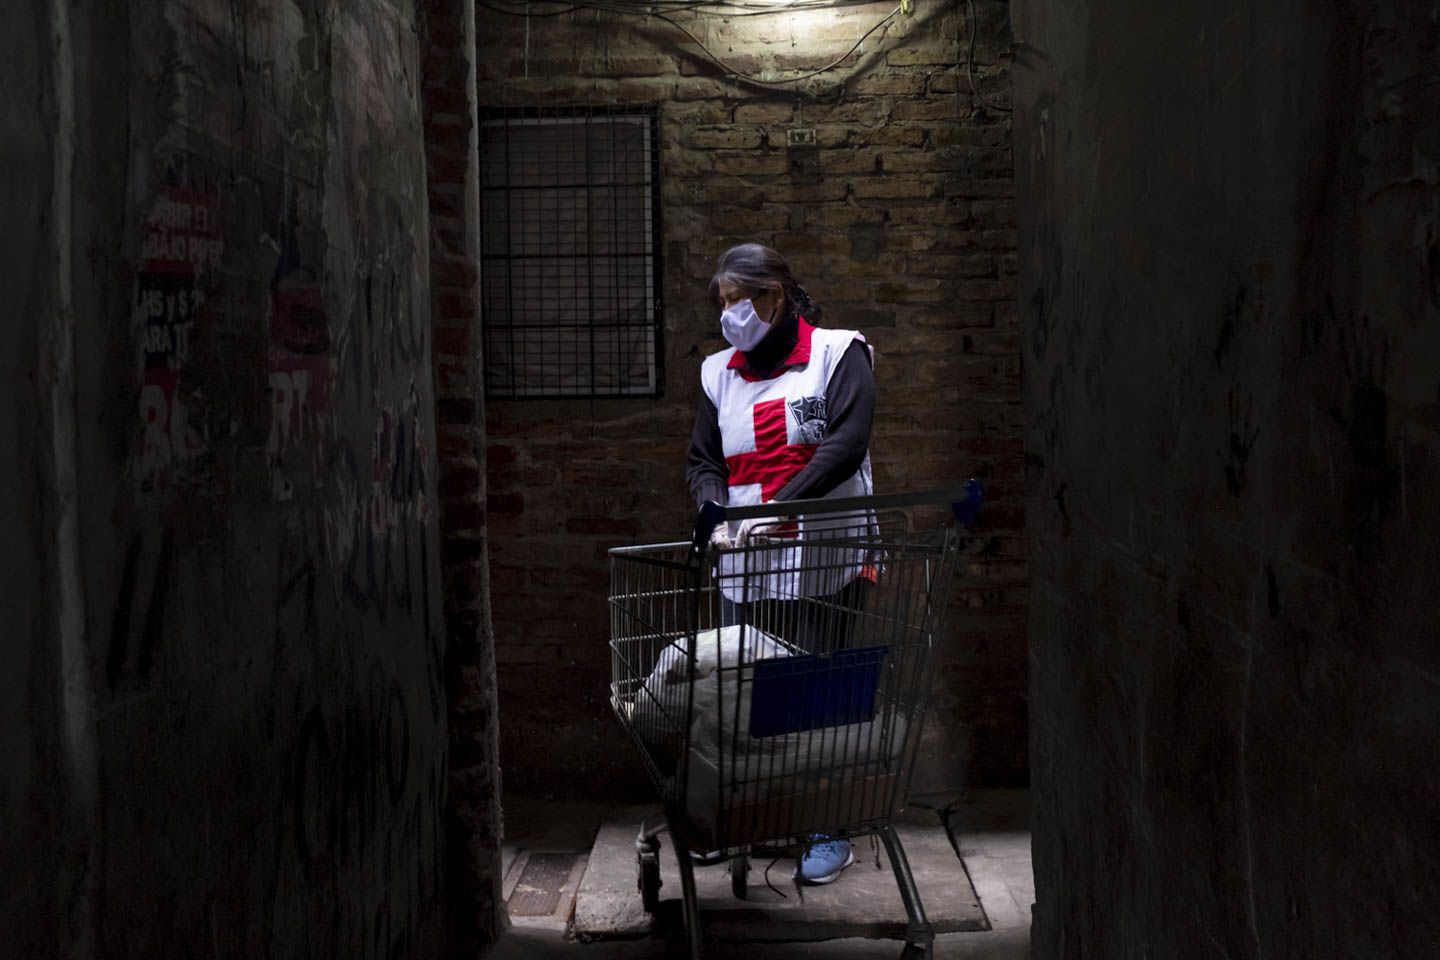 Yoli, in one of the dark and narrow corridors of the Villa, delivering supplies to those homebound. Image by Anita Pouchard Serra. Argentina, 2020.